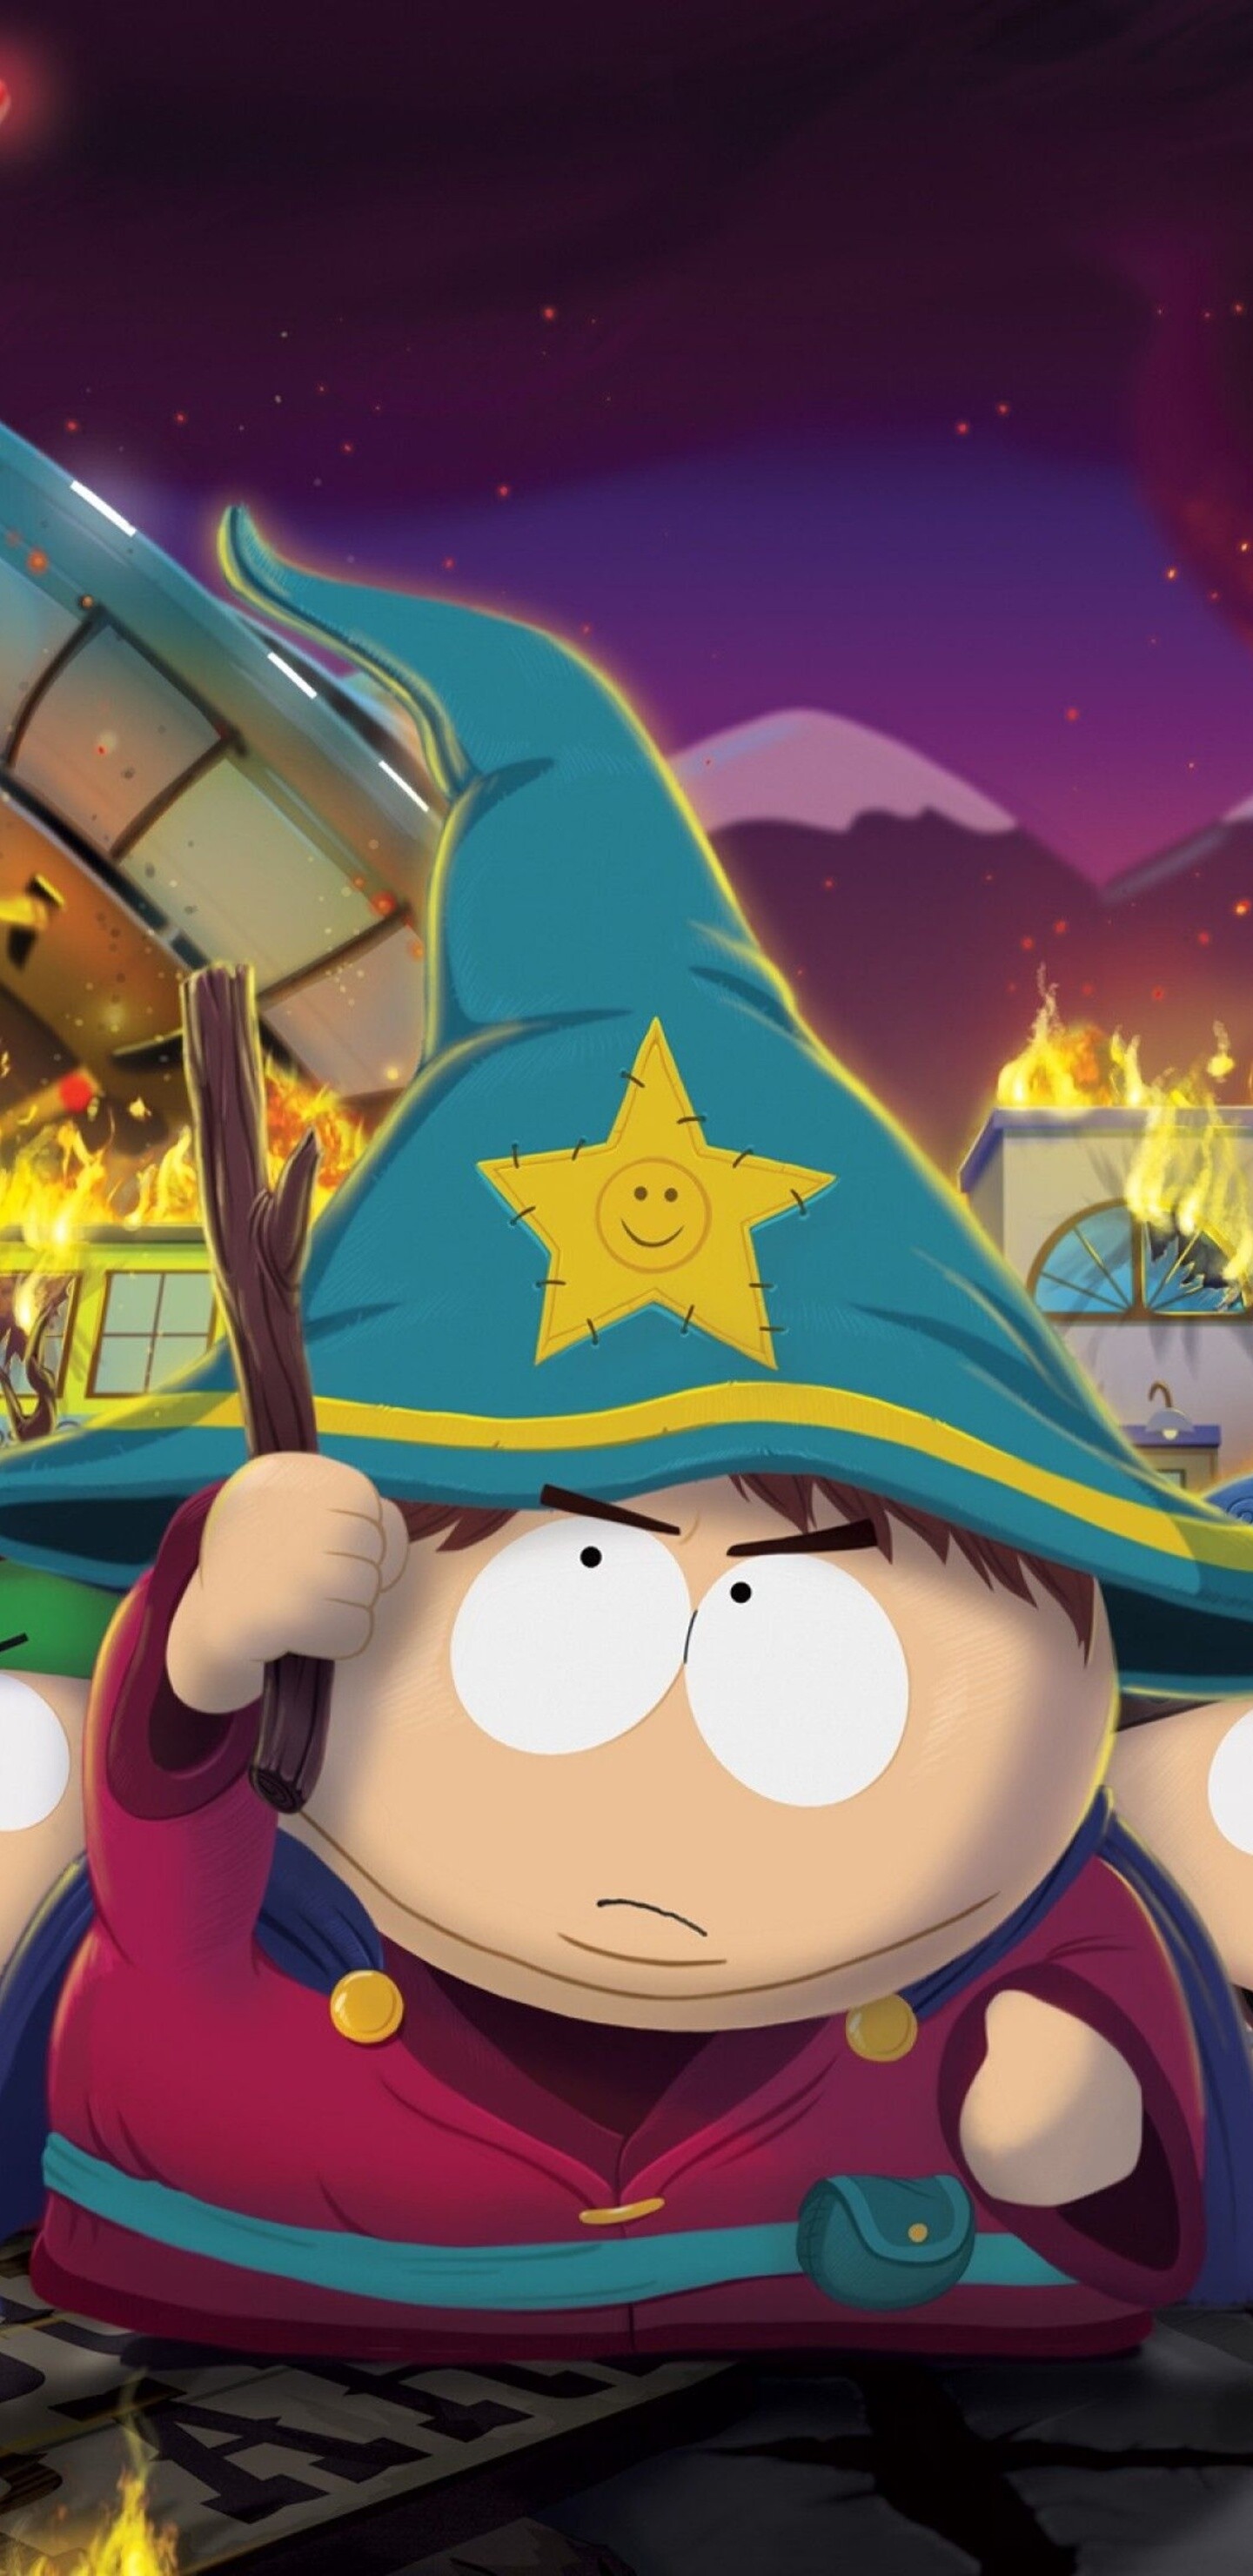 South Park: The Stick of Truth, Released in 2017, Grand Wizard King Cartman. 1440x2960 HD Wallpaper.